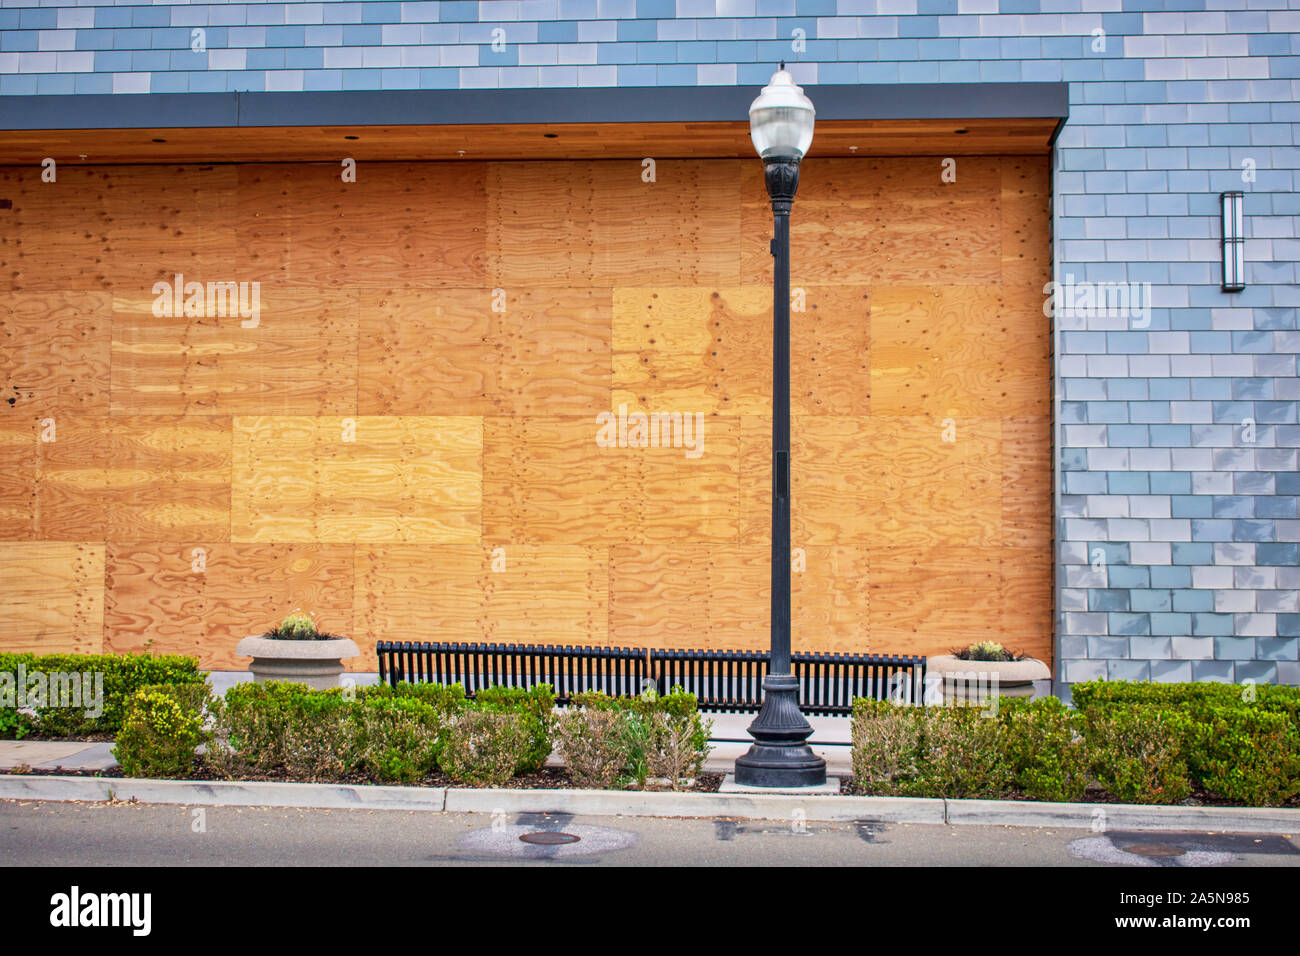 Preparation for hurricane - store, restaurant boarded up with plywood sheets. Plywood shutters prevent unauthorized access to property Stock Photo